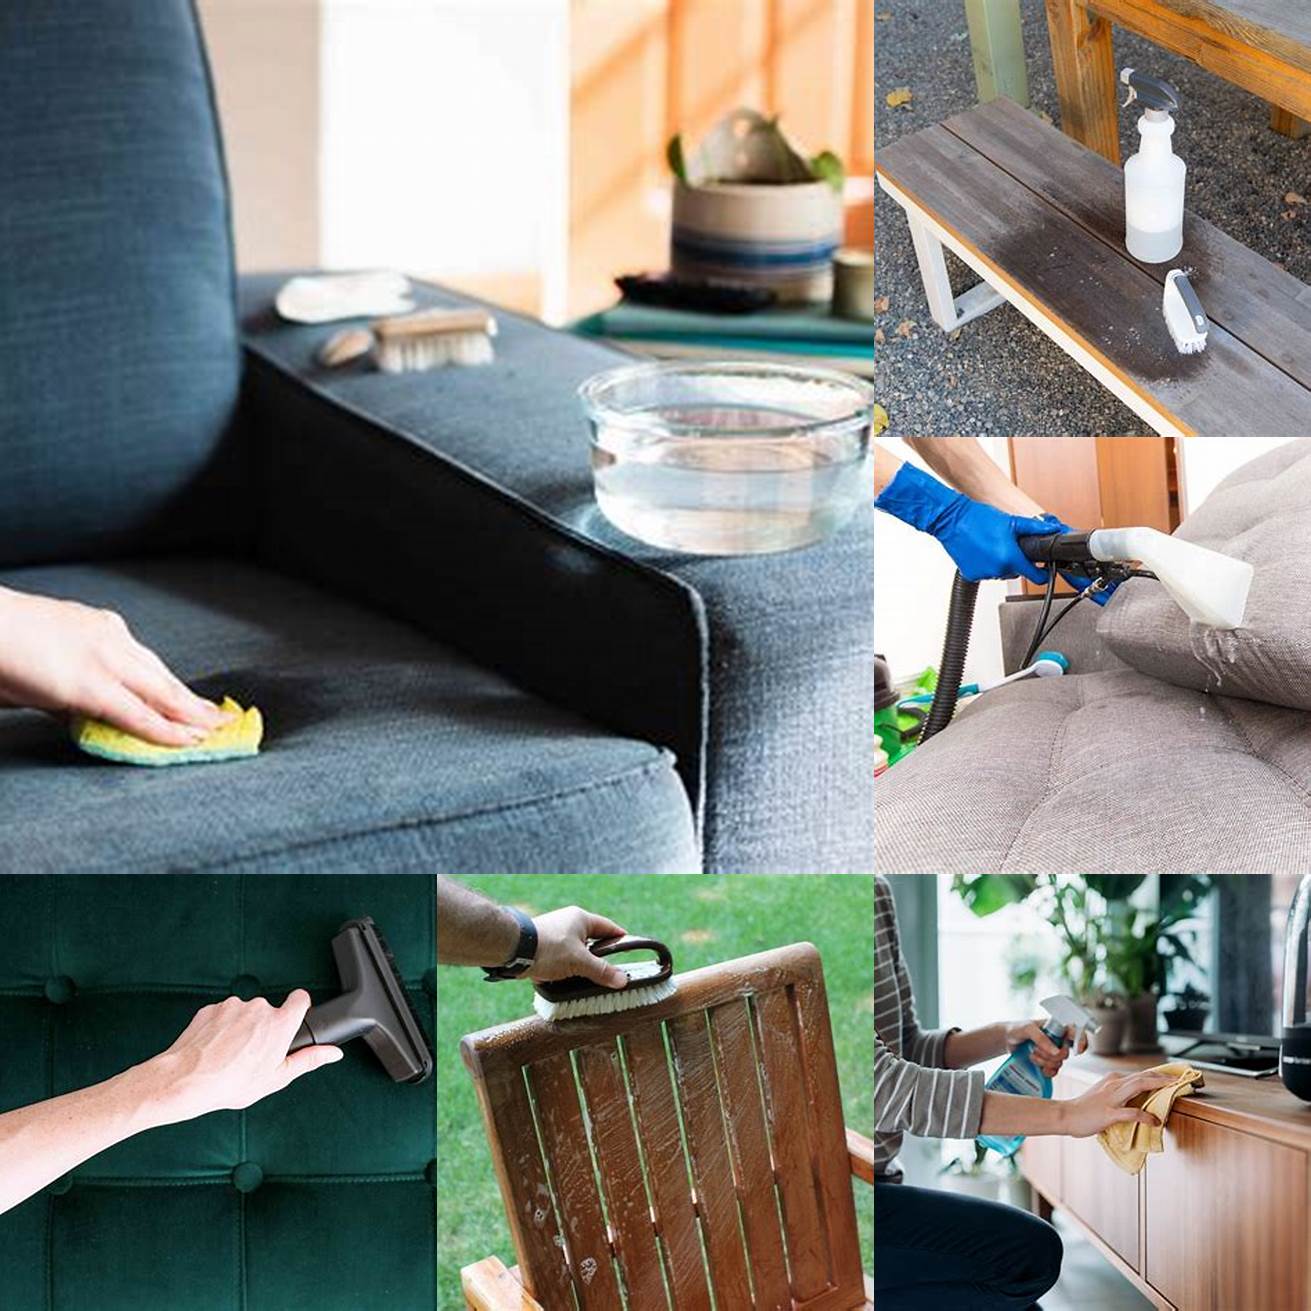 Using a Soft Brush to Clean the Furniture